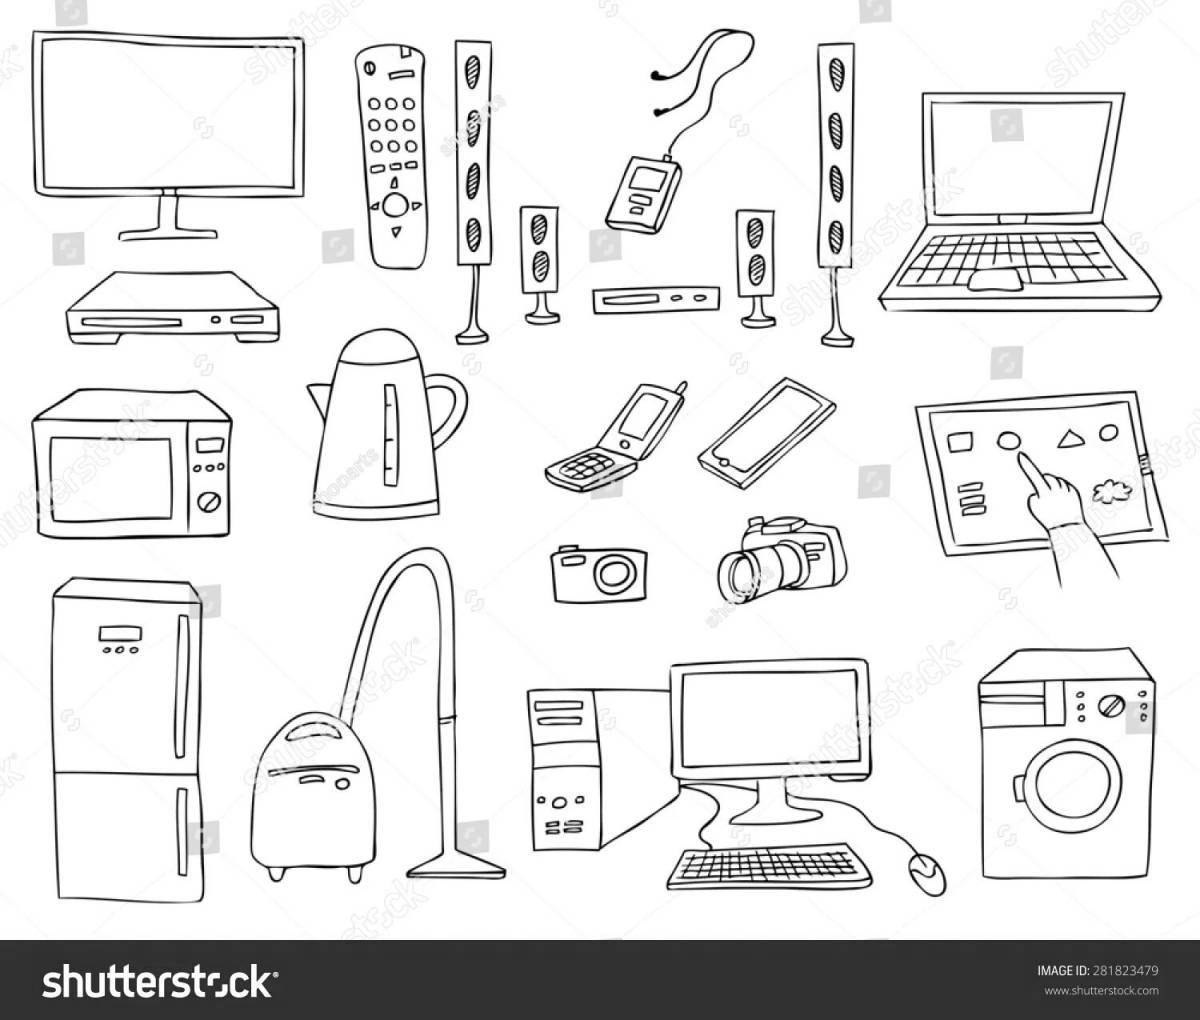 Fancy coloring of household appliances